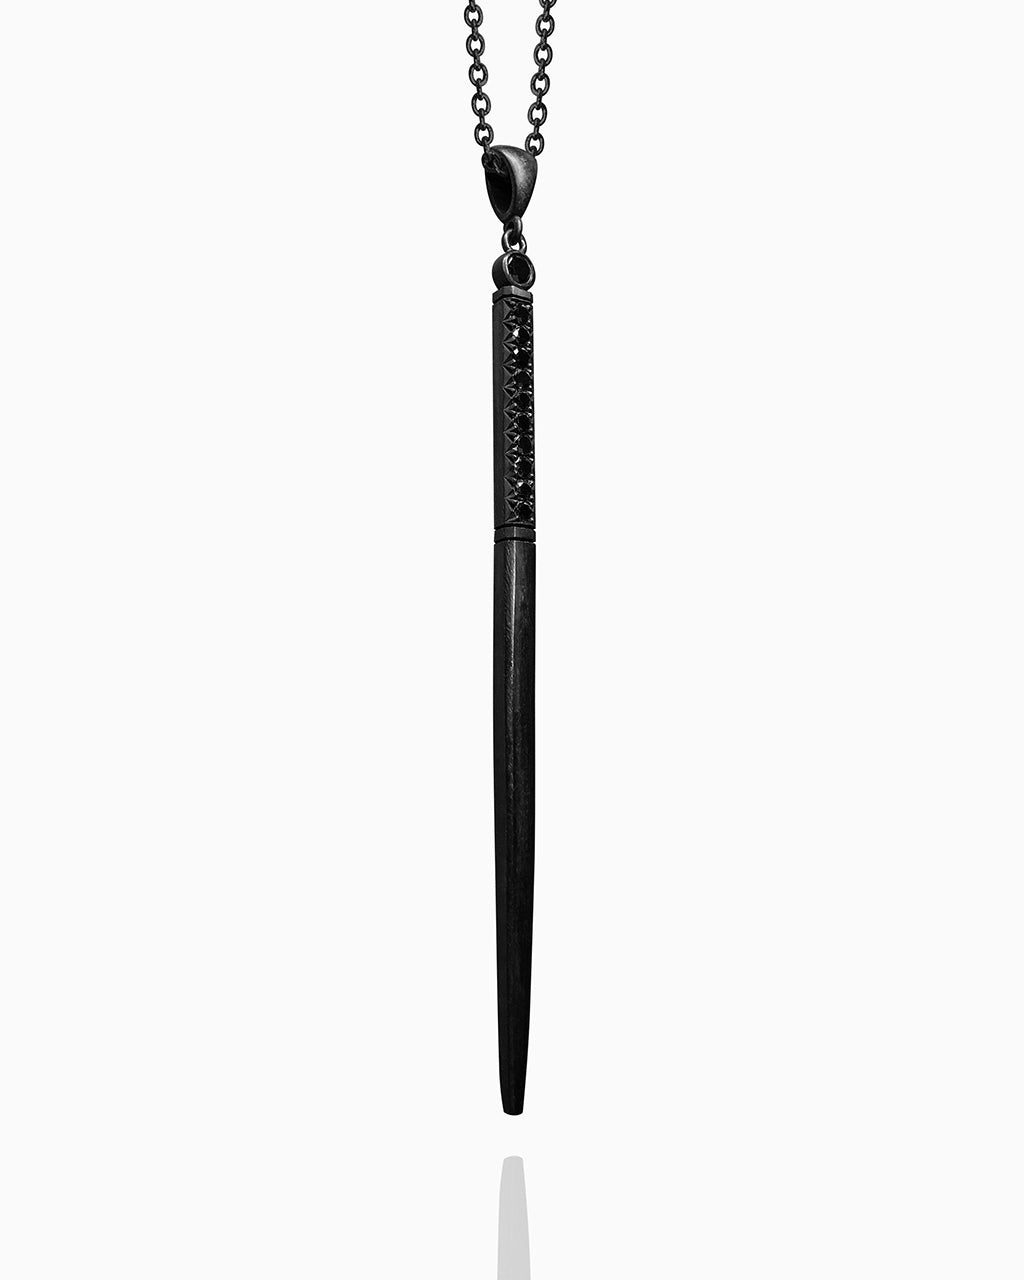 A blackened wand necklace made from sterling silver hanging on a blackened chain against a white background. The handle at the top of the wand is set with a single row of black diamonds, with a larger black diamond set in a round bezel at the very top. Below, there are two carved lines and then a smooth, tapered square shaft.